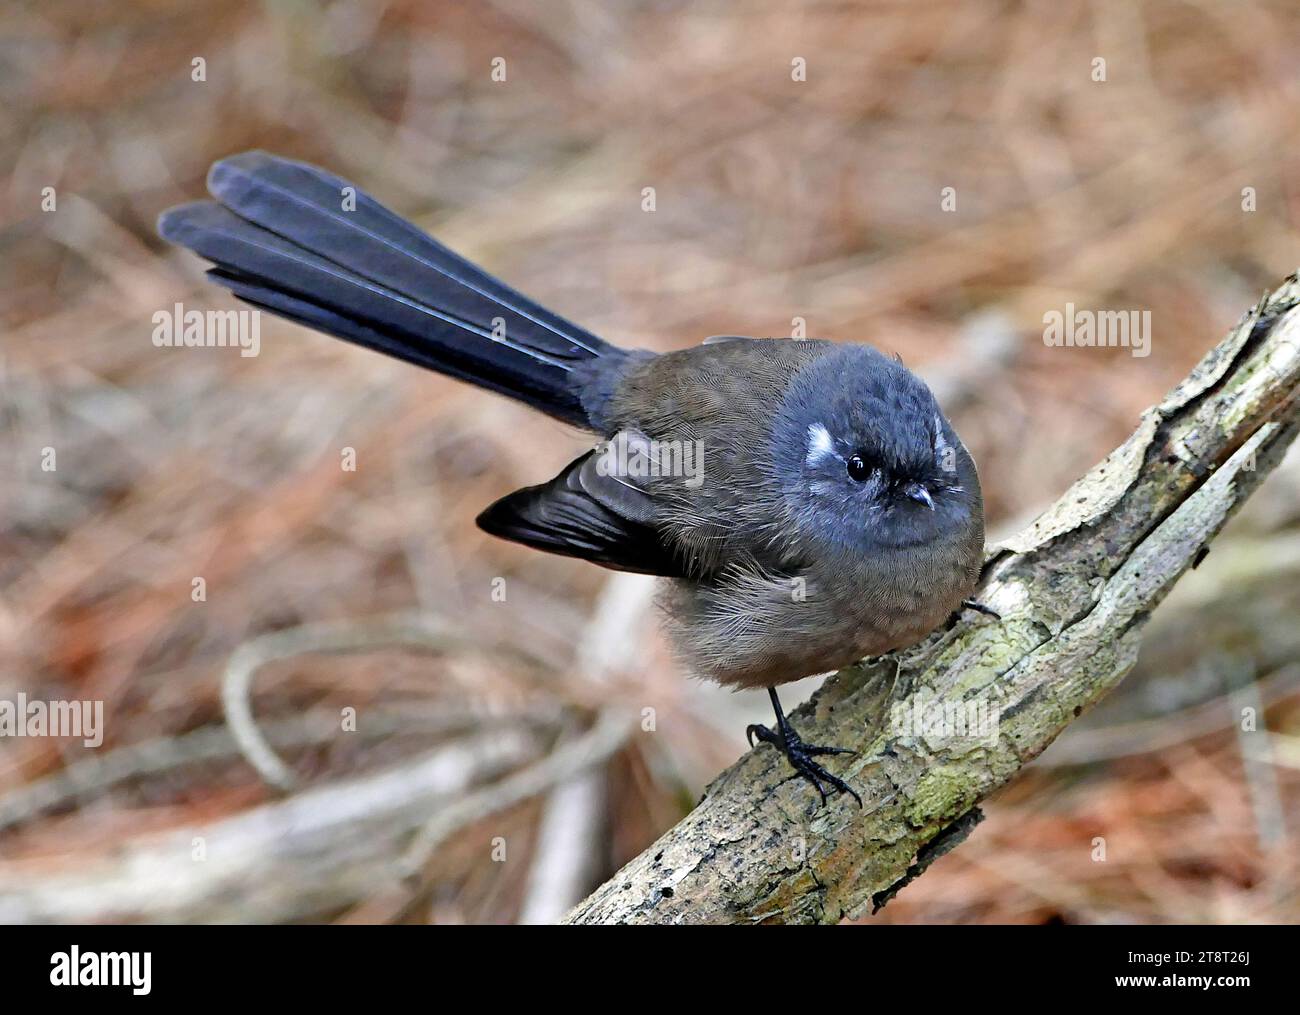 The fantail. (Rhipidura fuliginosa), The fantail or pīwakawaka (Rhipidura fuliginosa) is 16 centimetres long, including its 8-centimetre tail. It weighs 8 grams. Most fantails are brown above and pale underneath. Their fan-like tail, usually held high above the body, is made up of long dark central feathers flanked by white feathers. About 20% of South Island fantails are completely black Stock Photo